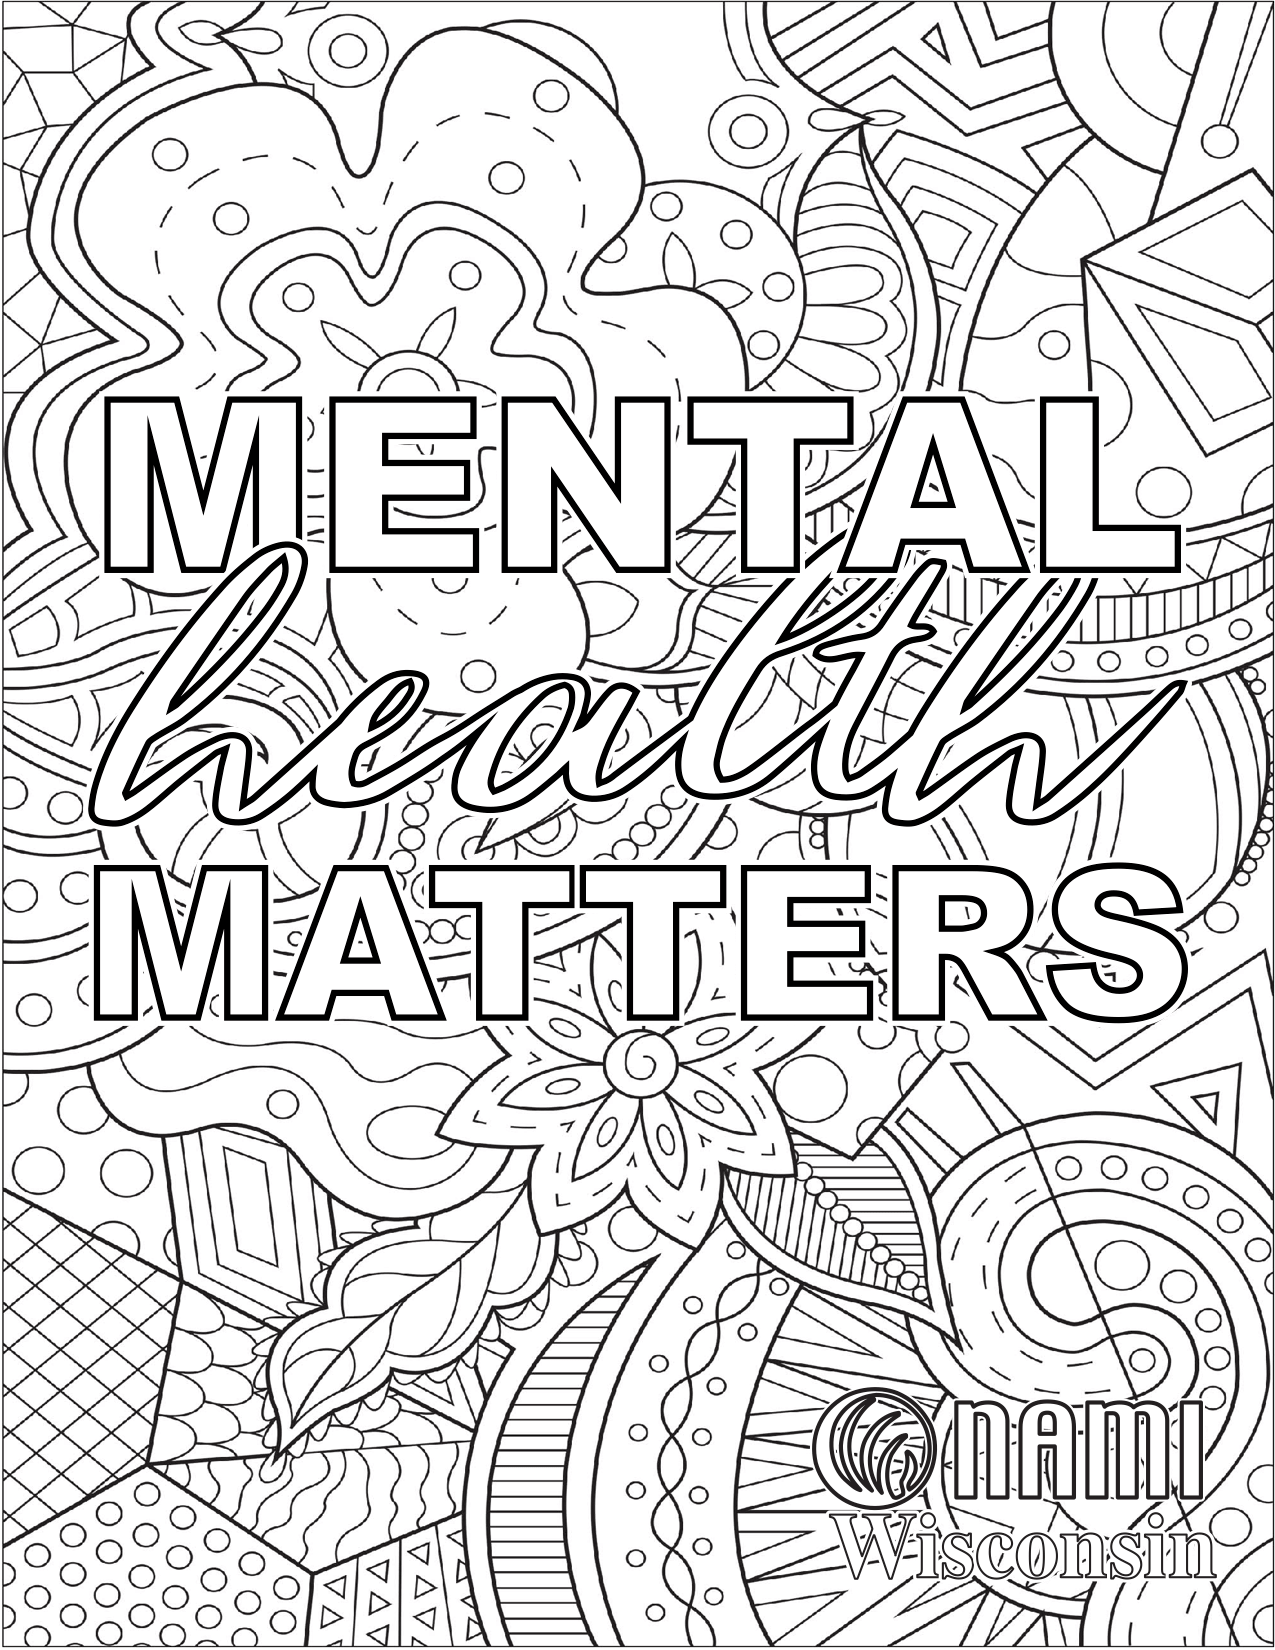 20 Therapeutic Coloring Pages for Kids   Happier Human